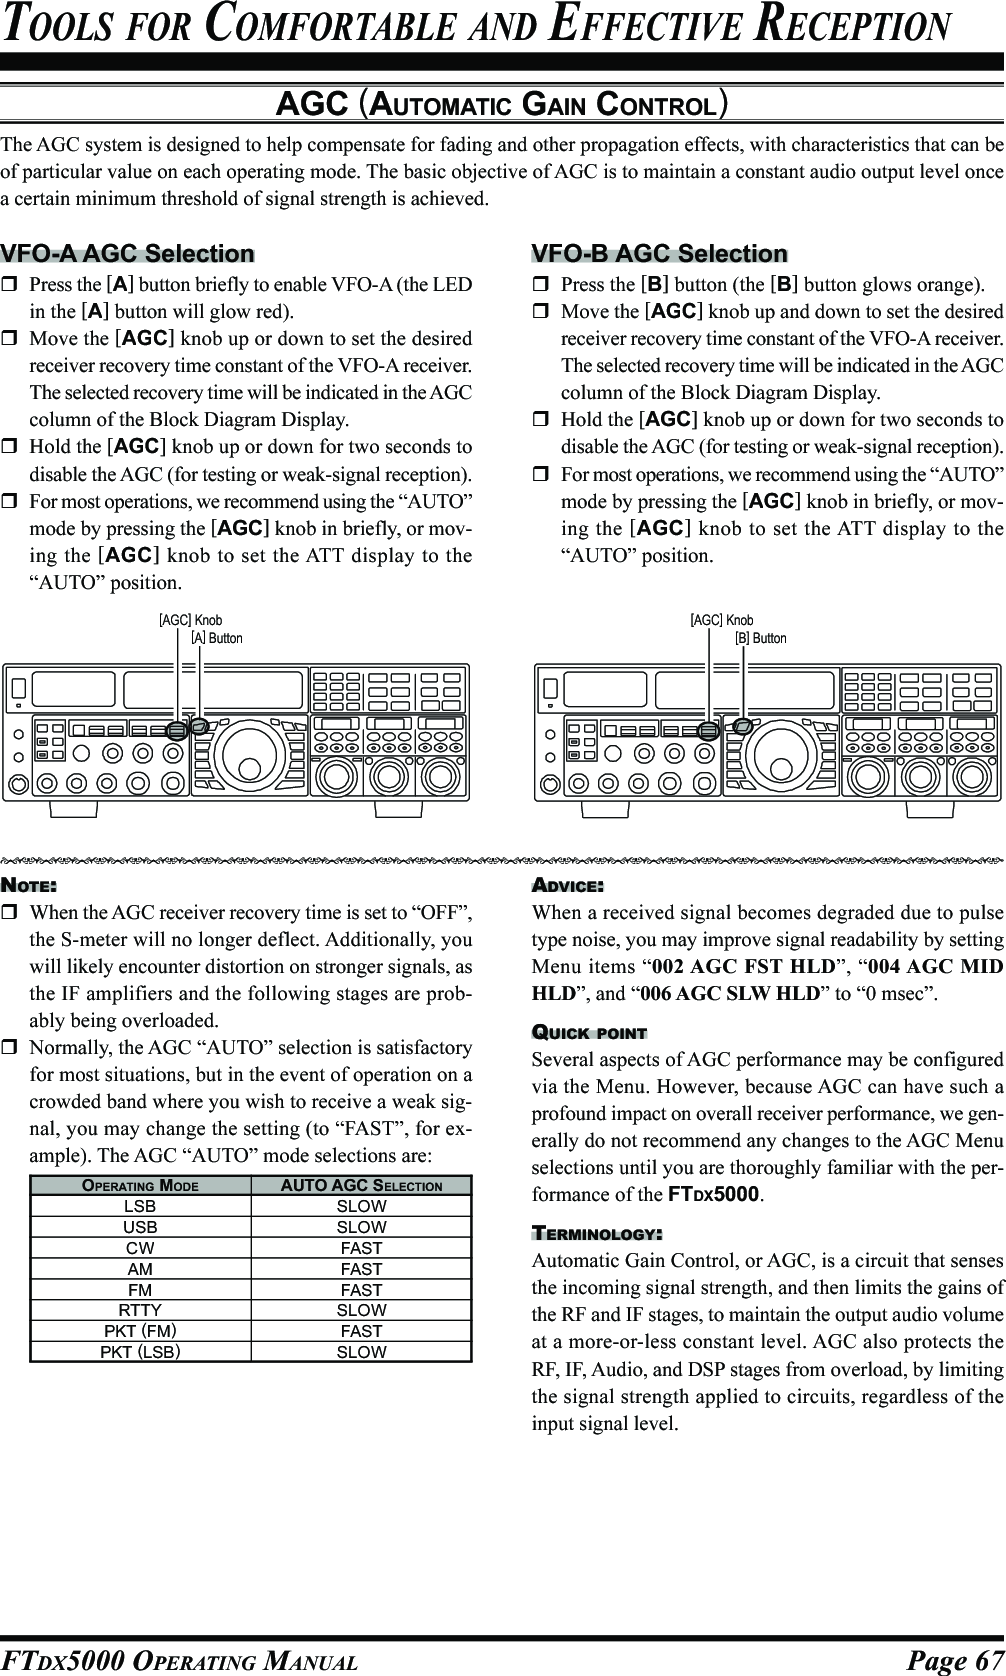 Page 67FTDX5000 OPERATING MANUALAGC (AUTOMATIC GAIN CONTROL)The AGC system is designed to help compensate for fading and other propagation effects, with characteristics that can beof particular value on each operating mode. The basic objective of AGC is to maintain a constant audio output level oncea certain minimum threshold of signal strength is achieved.VFO-A AGC SelectionPress the [A] button briefly to enable VFO-A (the LEDin the [A] button will glow red).Move the [AGC] knob up or down to set the desiredreceiver recovery time constant of the VFO-A receiver.The selected recovery time will be indicated in the AGCcolumn of the Block Diagram Display.Hold the [AGC] knob up or down for two seconds todisable the AGC (for testing or weak-signal reception).For most operations, we recommend using the “AUTO”mode by pressing the [AGC] knob in briefly, or mov-ing the [AGC] knob to set the ATT display to the“AUTO” position.VFO-B AGC SelectionPress the [B] button (the [B] button glows orange).Move the [AGC] knob up and down to set the desiredreceiver recovery time constant of the VFO-A receiver.The selected recovery time will be indicated in the AGCcolumn of the Block Diagram Display.Hold the [AGC] knob up or down for two seconds todisable the AGC (for testing or weak-signal reception).For most operations, we recommend using the “AUTO”mode by pressing the [AGC] knob in briefly, or mov-ing the [AGC] knob to set the ATT display to the“AUTO” position.TOOLS FOR COMFORTABLE AND EFFECTIVE RECEPTIONNOTE:When the AGC receiver recovery time is set to “OFF”,the S-meter will no longer deflect. Additionally, youwill likely encounter distortion on stronger signals, asthe IF amplifiers and the following stages are prob-ably being overloaded.Normally, the AGC “AUTO” selection is satisfactoryfor most situations, but in the event of operation on acrowded band where you wish to receive a weak sig-nal, you may change the setting (to “FAST”, for ex-ample). The AGC “AUTO” mode selections are:[A] Button[AGC] Knob[B] Button[AGC] KnobADVICE:When a received signal becomes degraded due to pulsetype noise, you may improve signal readability by settingMenu items “002 AGC FST HLD”, “004 AGC MIDHLD”, and “006 AGC SLW HLD” to “0 msec”.QUICK POINTSeveral aspects of AGC performance may be configuredvia the Menu. However, because AGC can have such aprofound impact on overall receiver performance, we gen-erally do not recommend any changes to the AGC Menuselections until you are thoroughly familiar with the per-formance of the FTDX5000.TERMINOLOGY:Automatic Gain Control, or AGC, is a circuit that sensesthe incoming signal strength, and then limits the gains ofthe RF and IF stages, to maintain the output audio volumeat a more-or-less constant level. AGC also protects theRF, IF, Audio, and DSP stages from overload, by limitingthe signal strength applied to circuits, regardless of theinput signal level.OPERATING MODELSBUSBCWAMFMRTTYPKT (FM)PKT (LSB)AUTO AGC SELECTIONSLOWSLOWFASTFASTFASTSLOWFASTSLOW